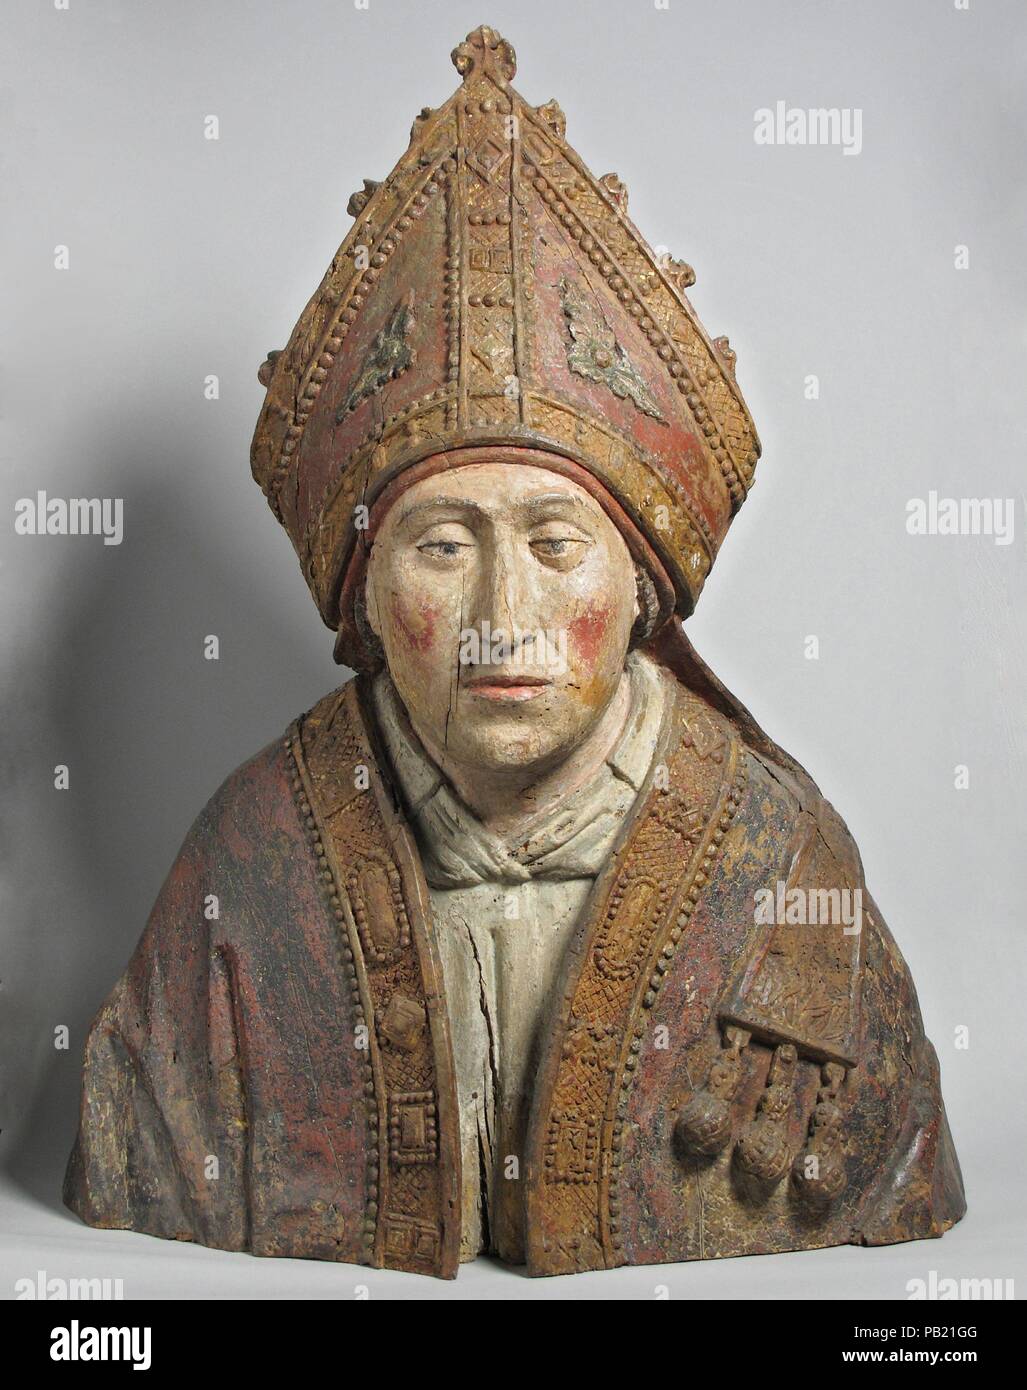 Bust of a Bishop. Culture: French. Dimensions: Overall: 26 1/4 x 19 1/2 in. (66.7 x 49.5 cm). Date: 15th century. Museum: Metropolitan Museum of Art, New York, USA. Stock Photo